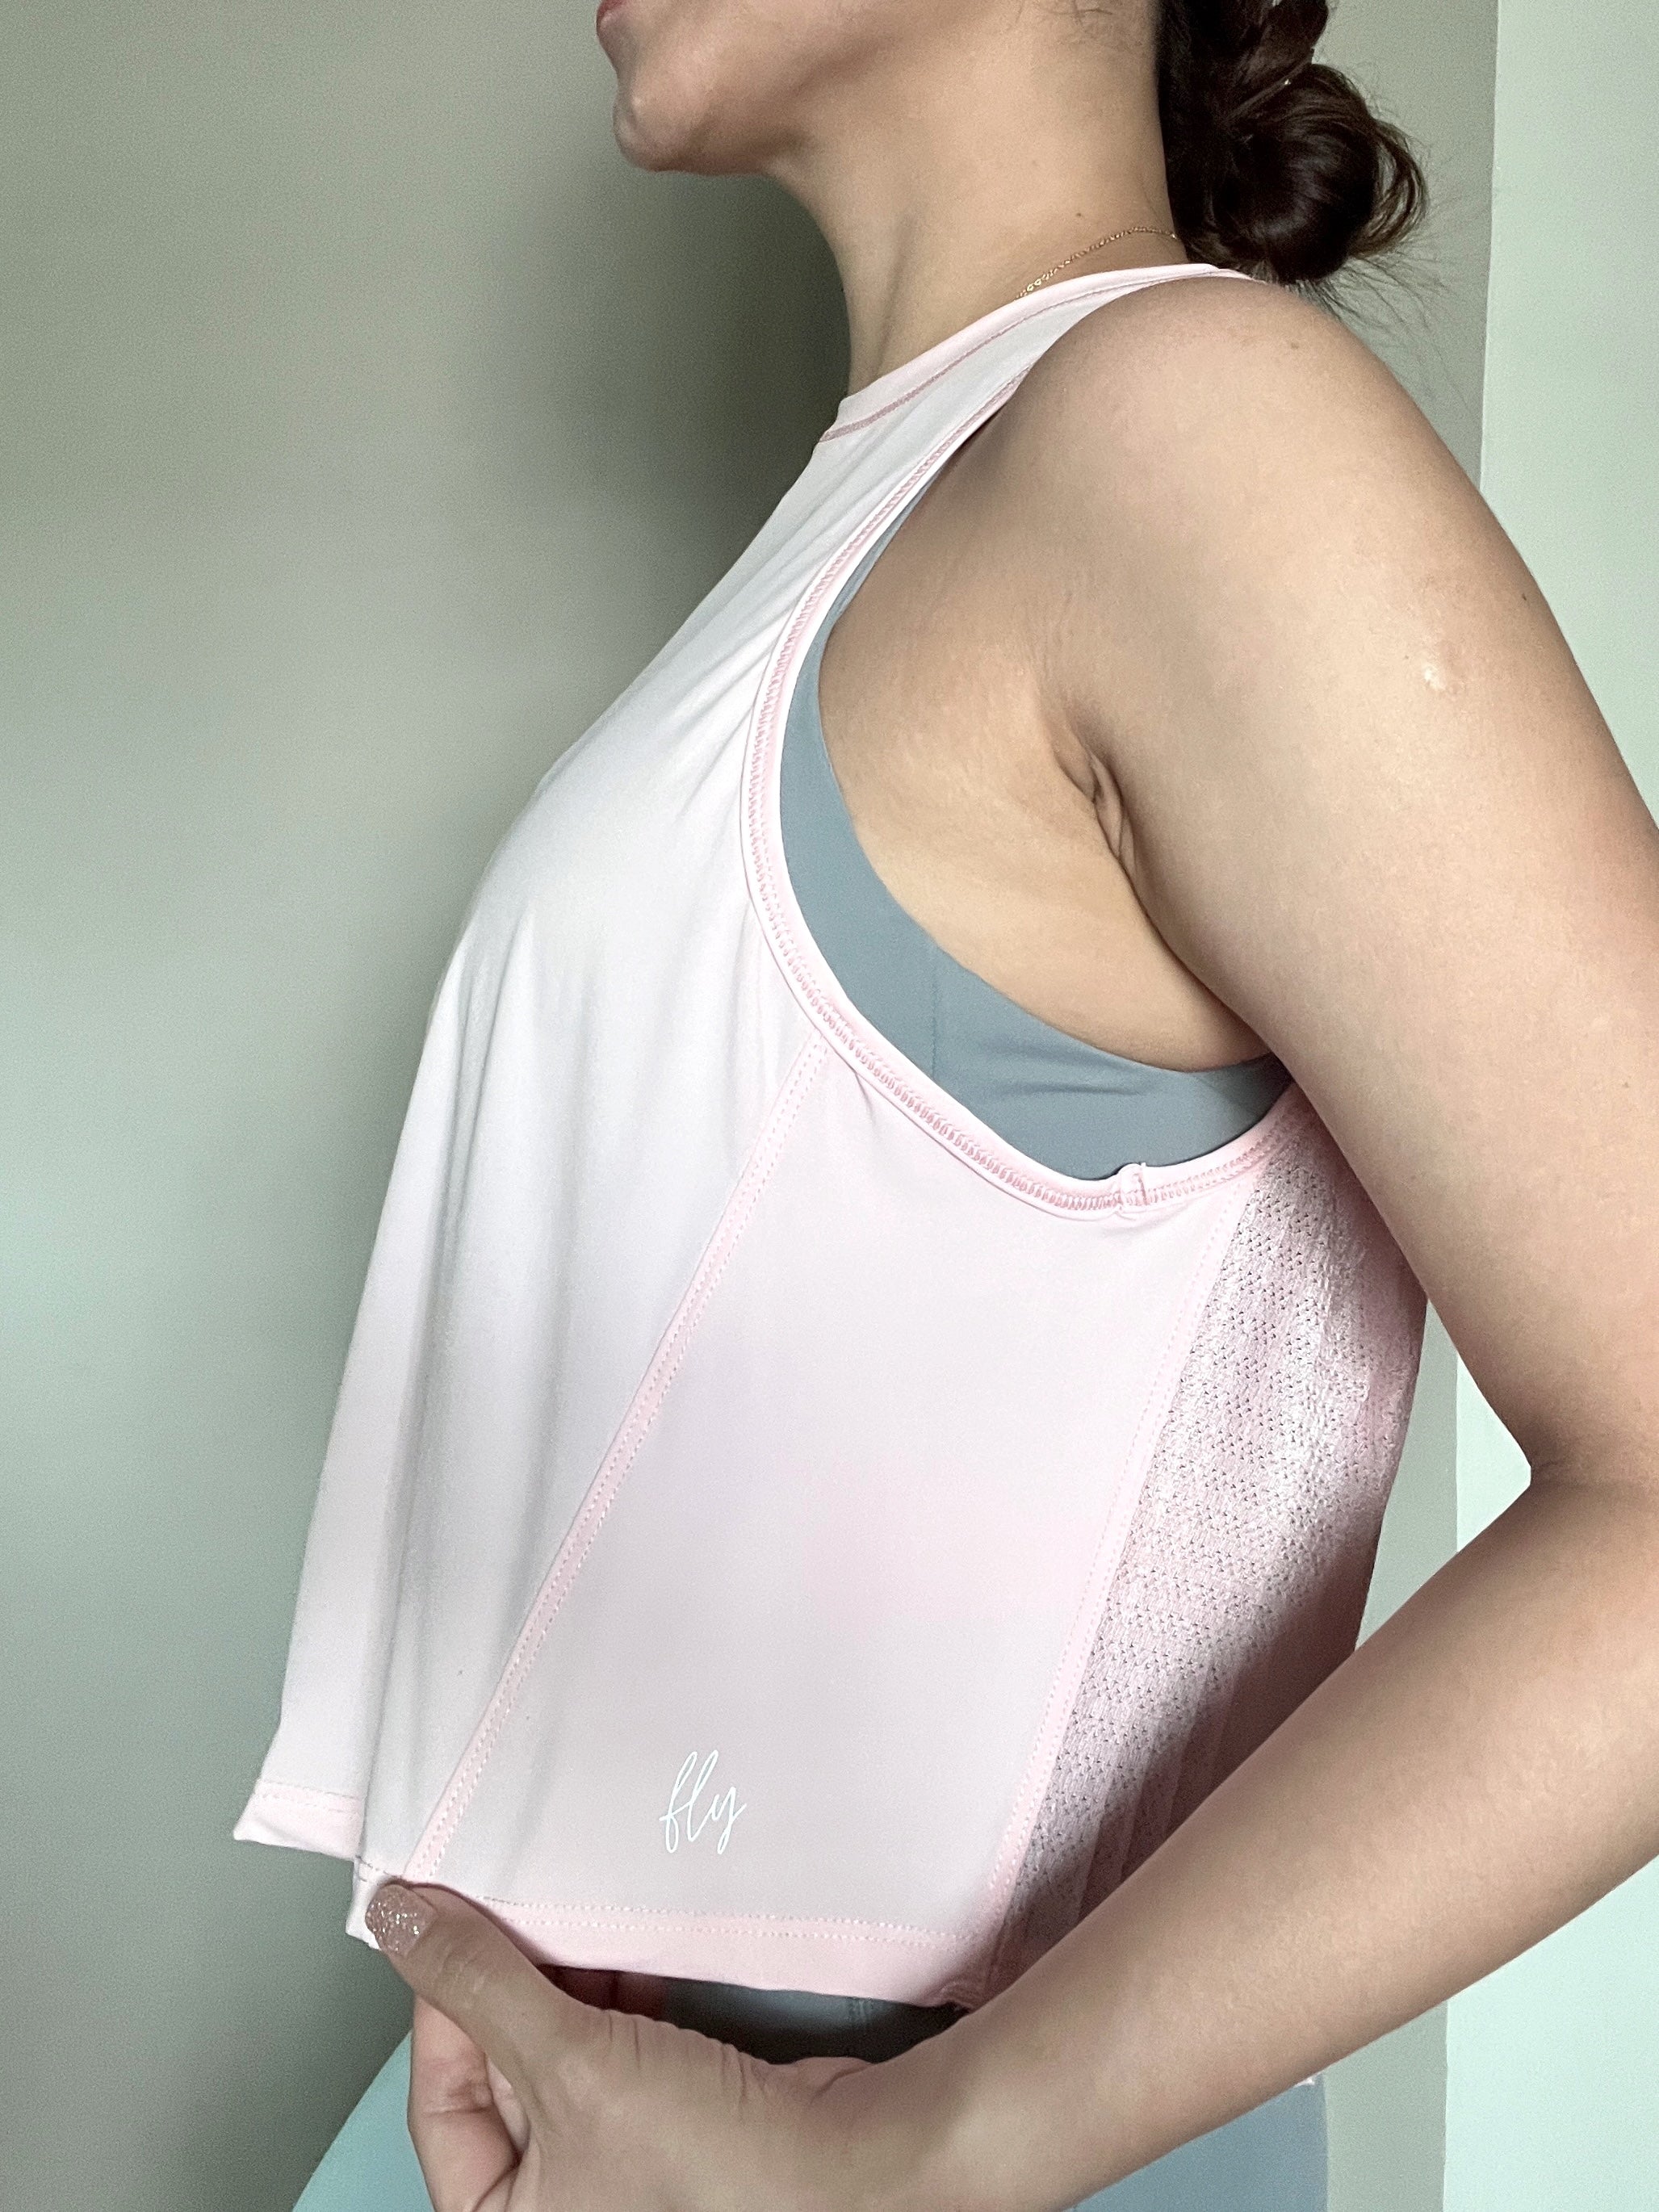 Pleated Tank Top in Pink